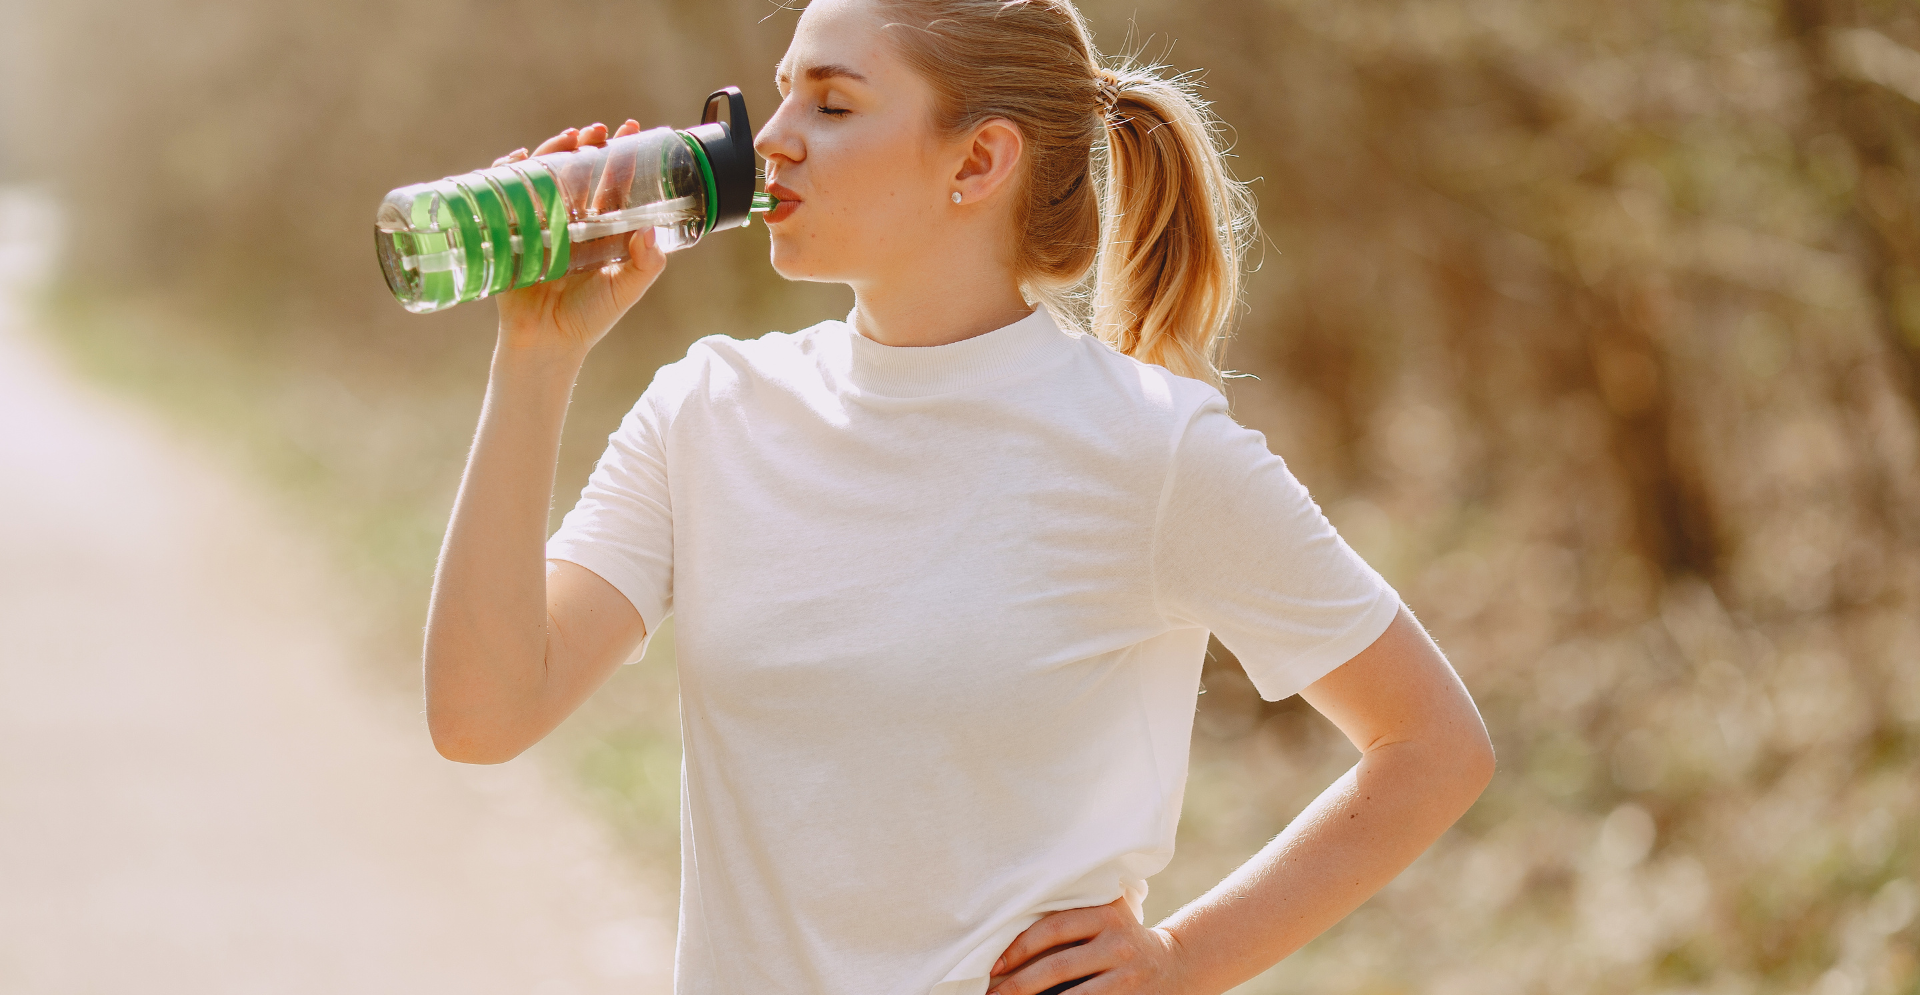 Why You Should Hydrate Effectively to Fuel Your Metabolism